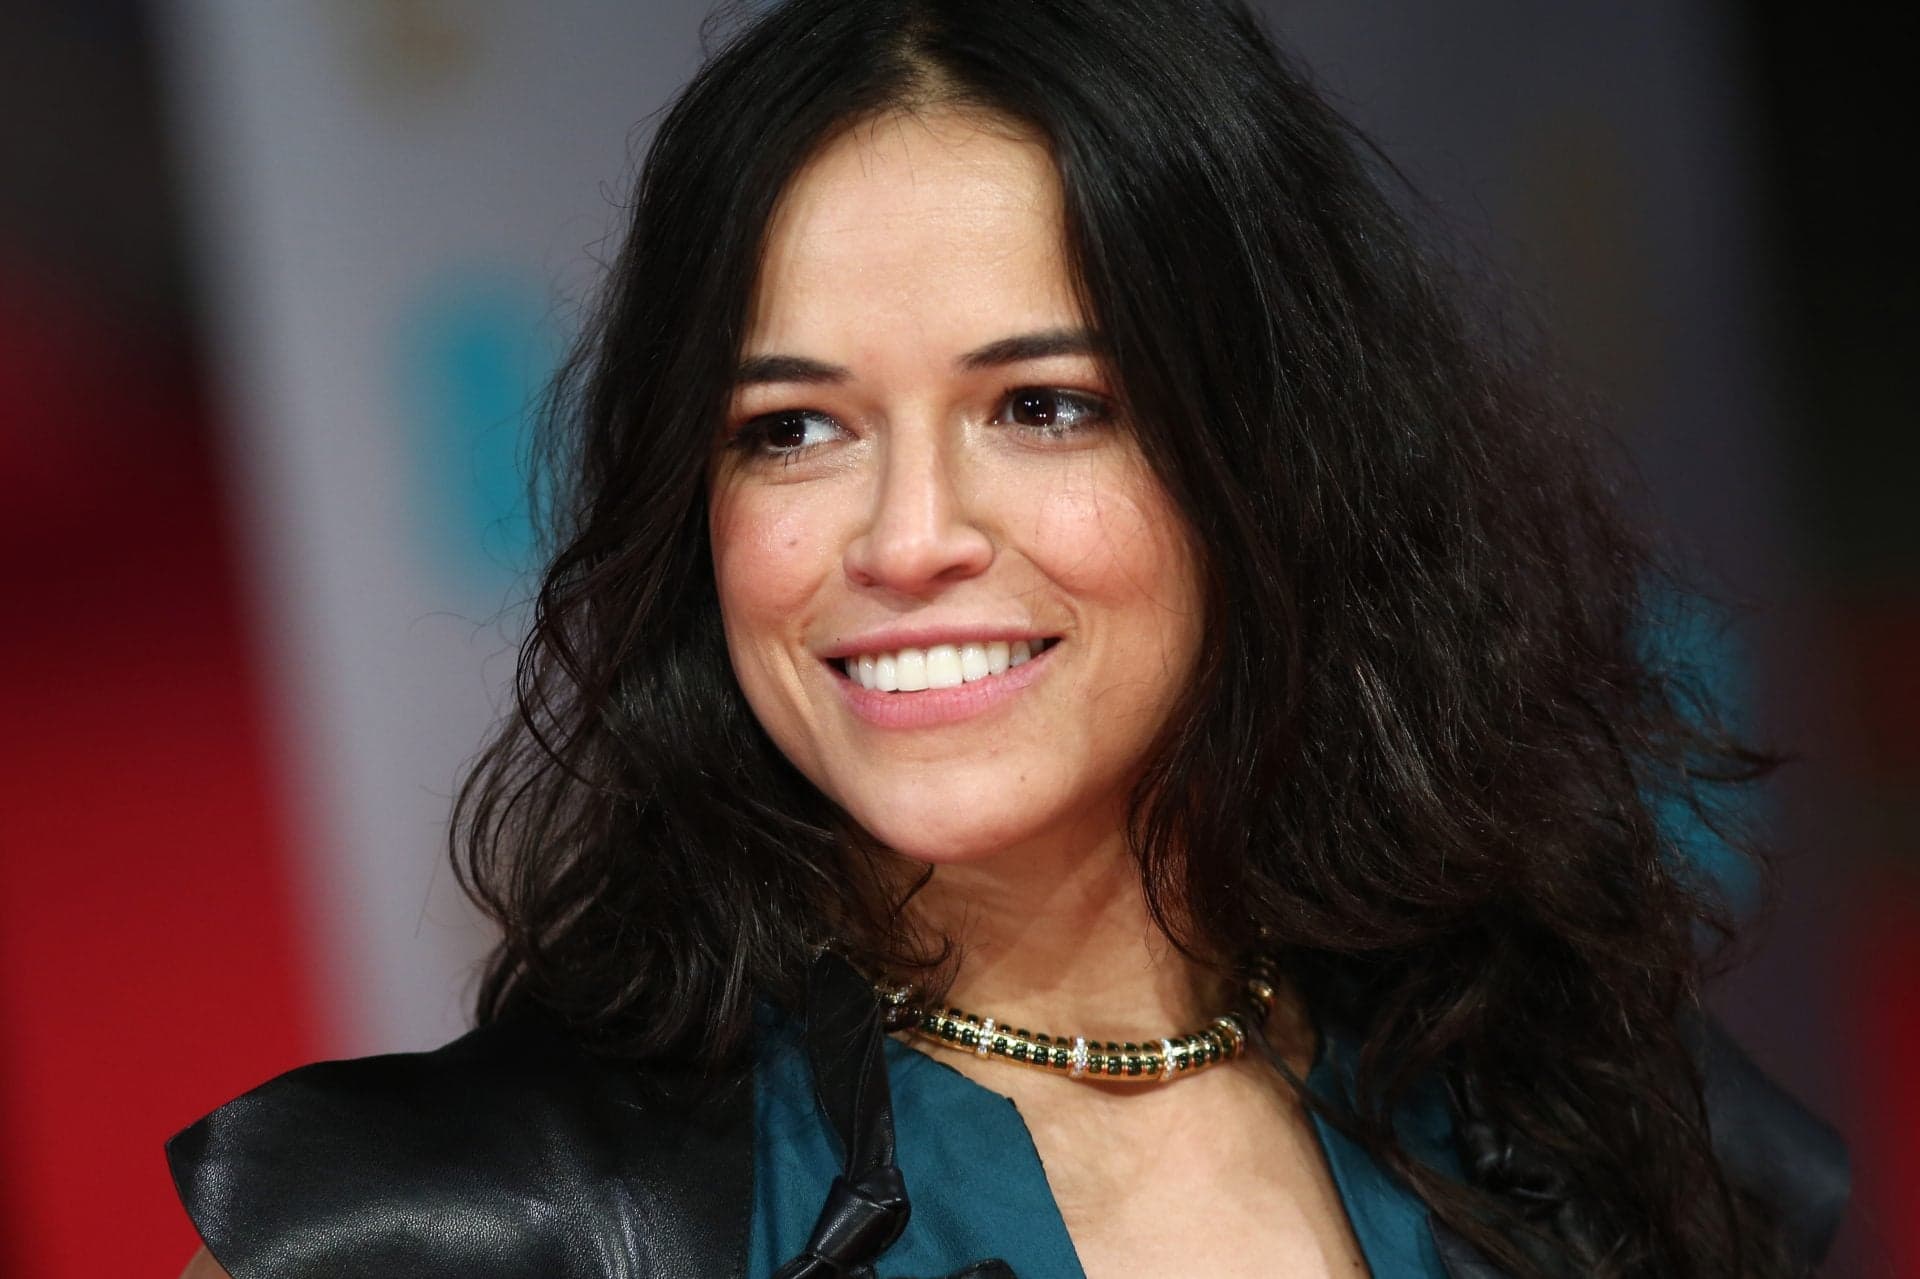 Charity Group Omaze Offers Chance to Win Supercar Track Day with Actress Michelle Rodriguez